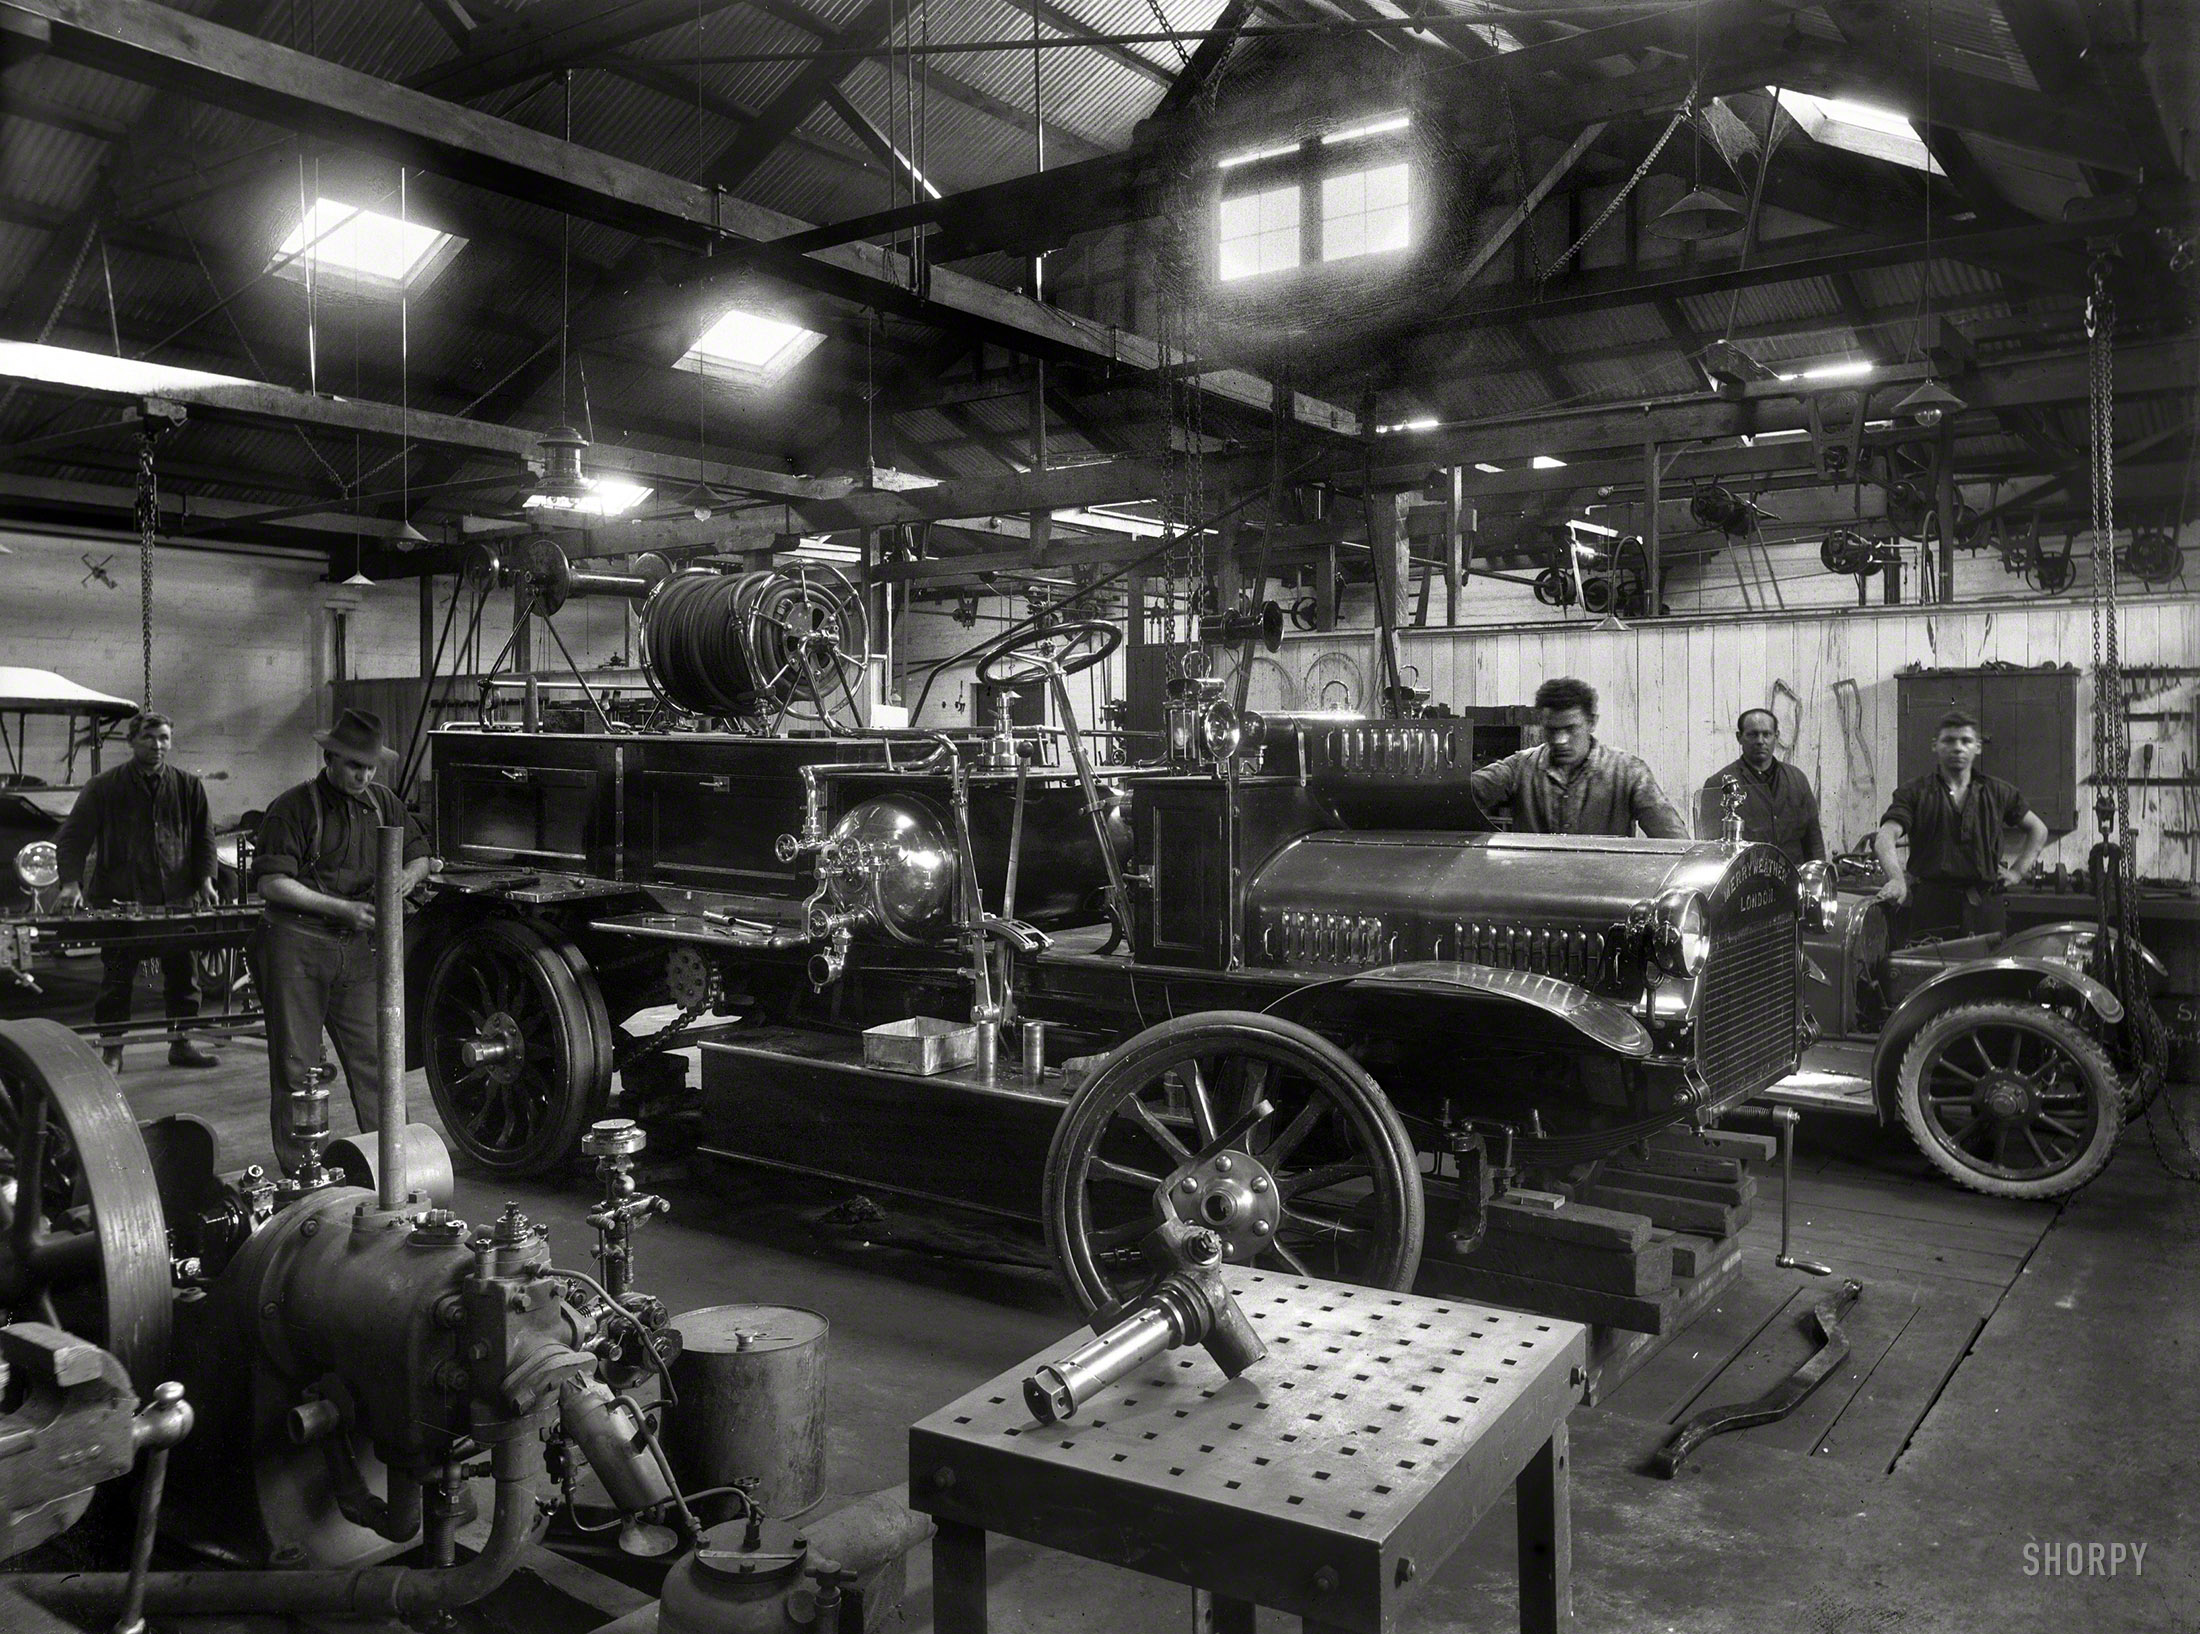 New Zealand circa 1921. "Wanganui Fire Brigade's Merryweather fire engine on blocks, probably in Chavannes Garage. When new, the vehicle had a large hose reel, later removed and replaced by rear lockers. A report in January 1926 stated that the machine was useless and unreliable. It was sold a short time later for 60 pounds." Glass negative by Frank J. Denton. View full size.